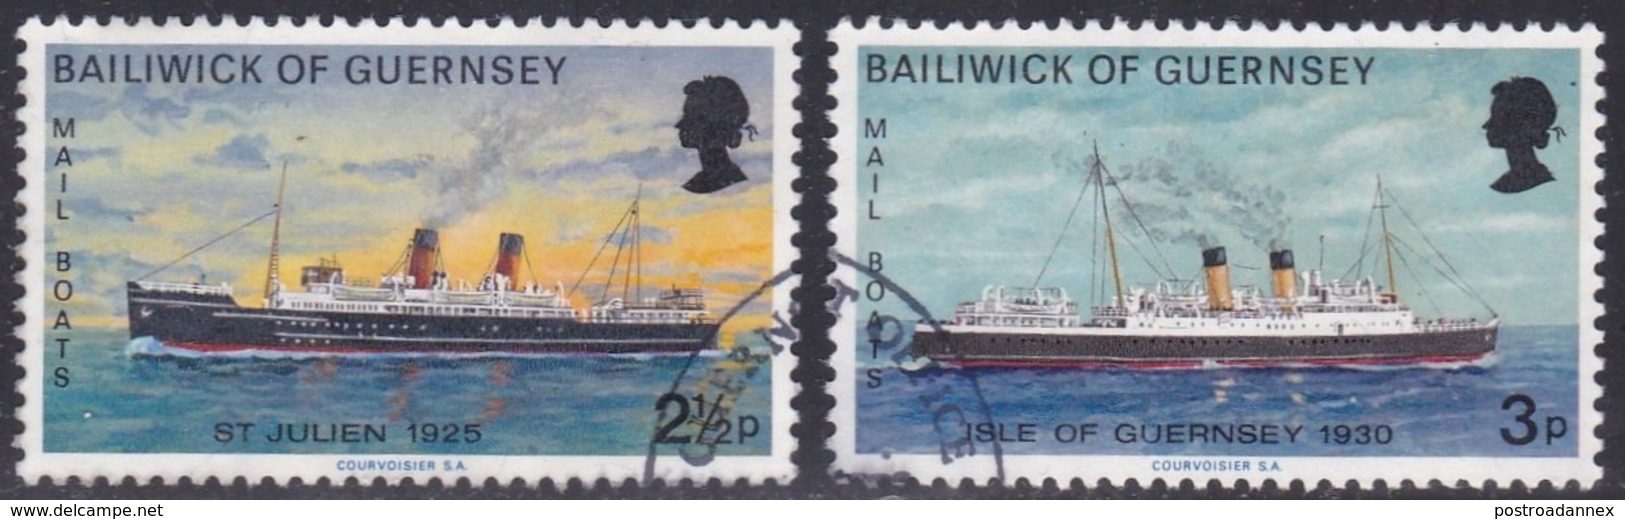 Guernsey, Scott #77-78, Used, Mail Boats, Issued 1973 - Guernsey